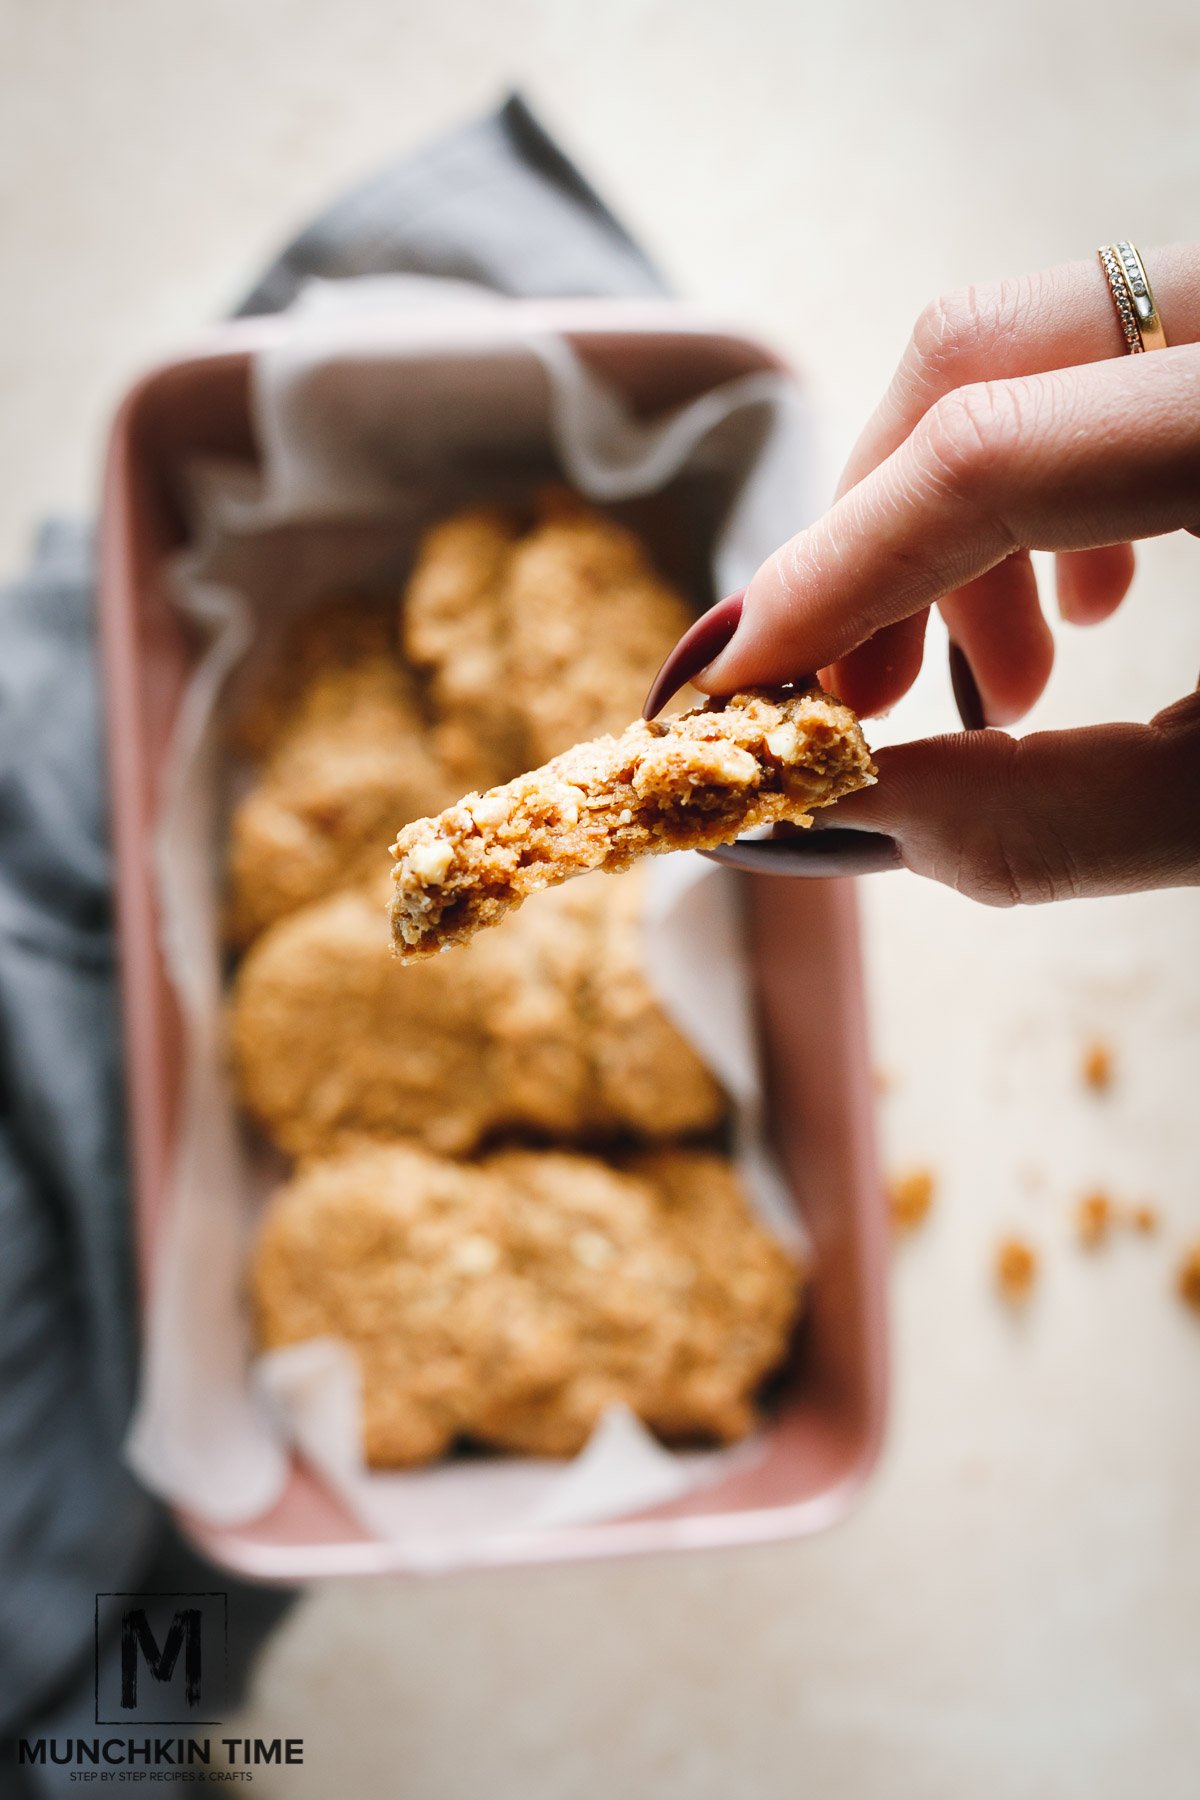 Best Ever Almond Butter Cookies Using Only 3 Ingredients.